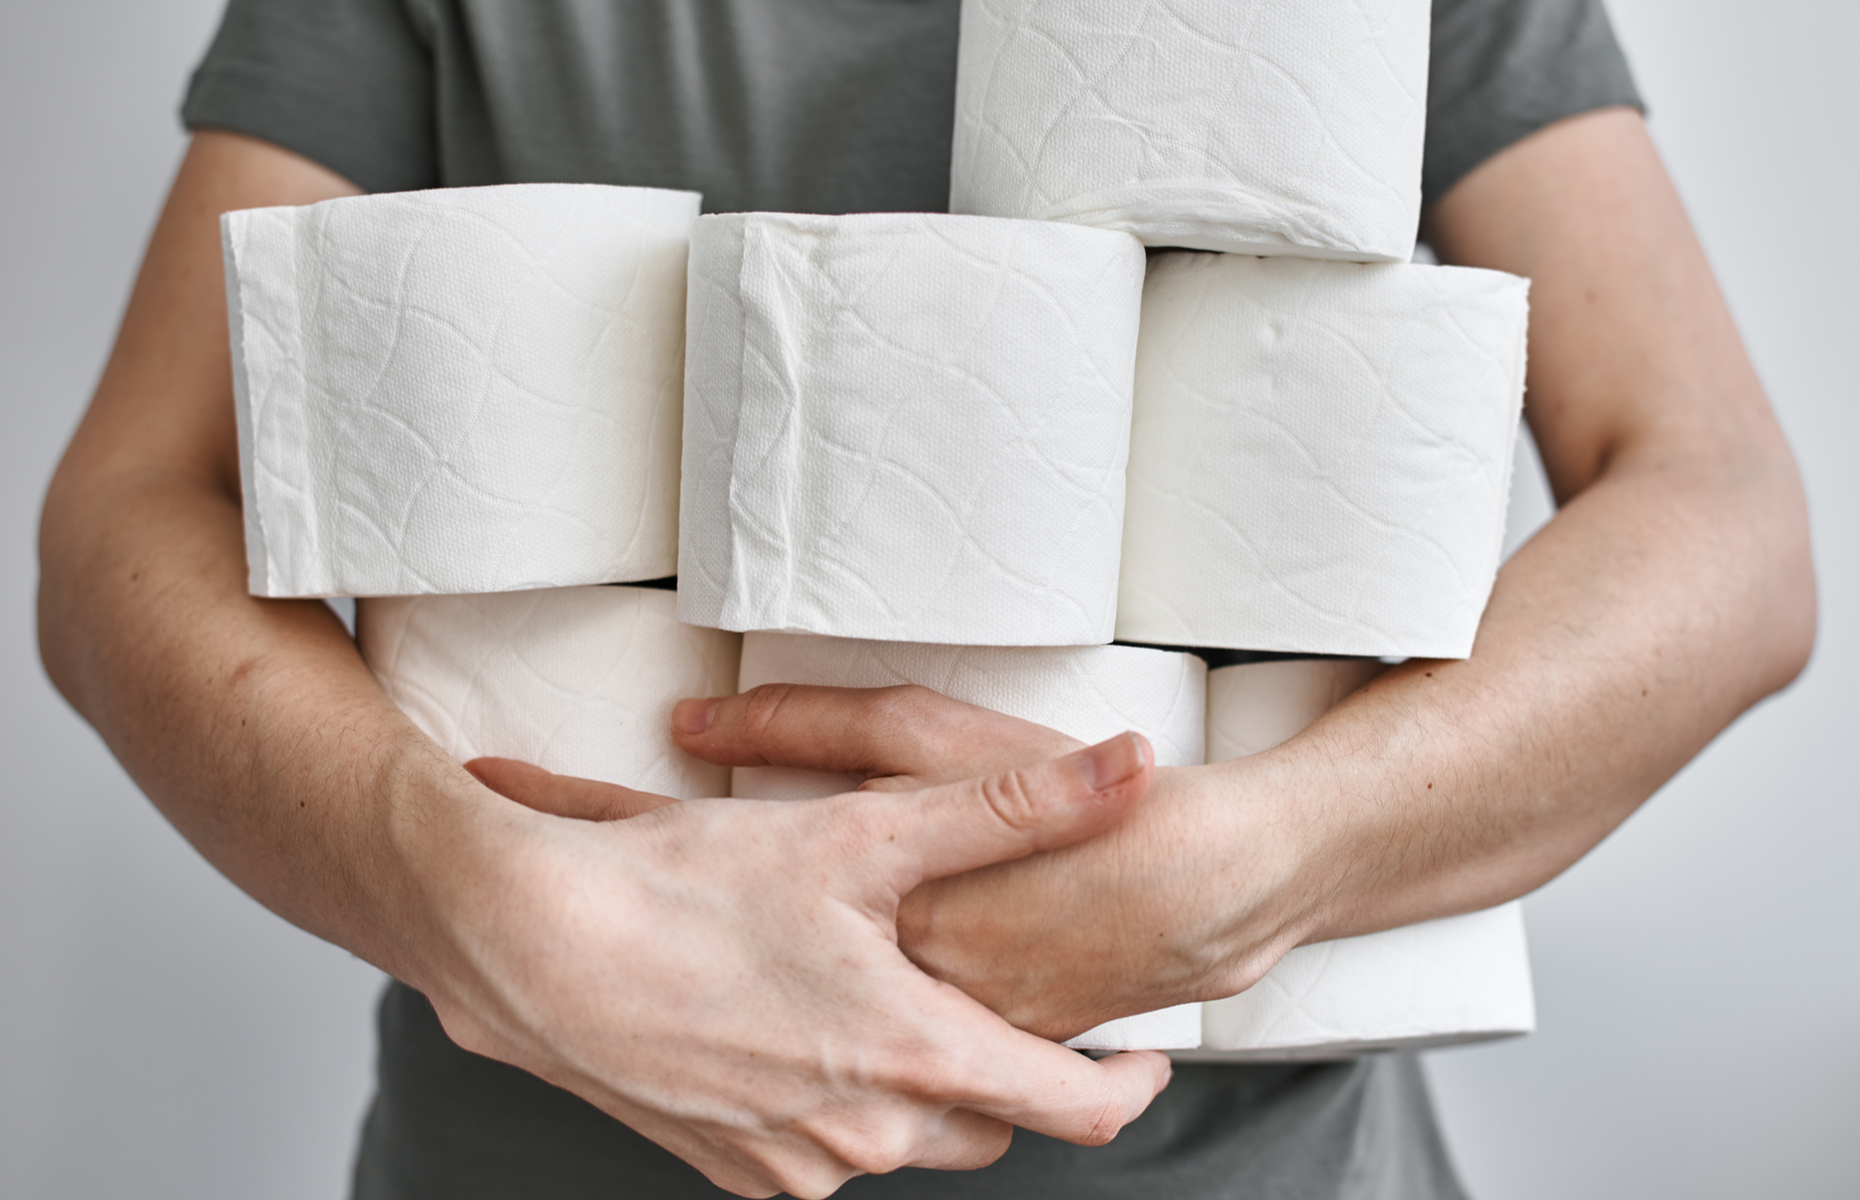 <p>Images of people tearing open packages of <a href="https://www.bbc.com/news/world-australia-51731422" rel="noreferrer noopener">toilet paper</a> circled the globe. The result was a worldwide shortage as many overstocked. Fortunately, this trend was short-lived. Many people, however, have been inspired to redesign their storage space or install a <a href="https://www.businessinsider.com/bidets-better-than-using-just-toilet-paper-2019-9" rel="noreferrer noopener">bidet</a> as one of their containment projects.</p>